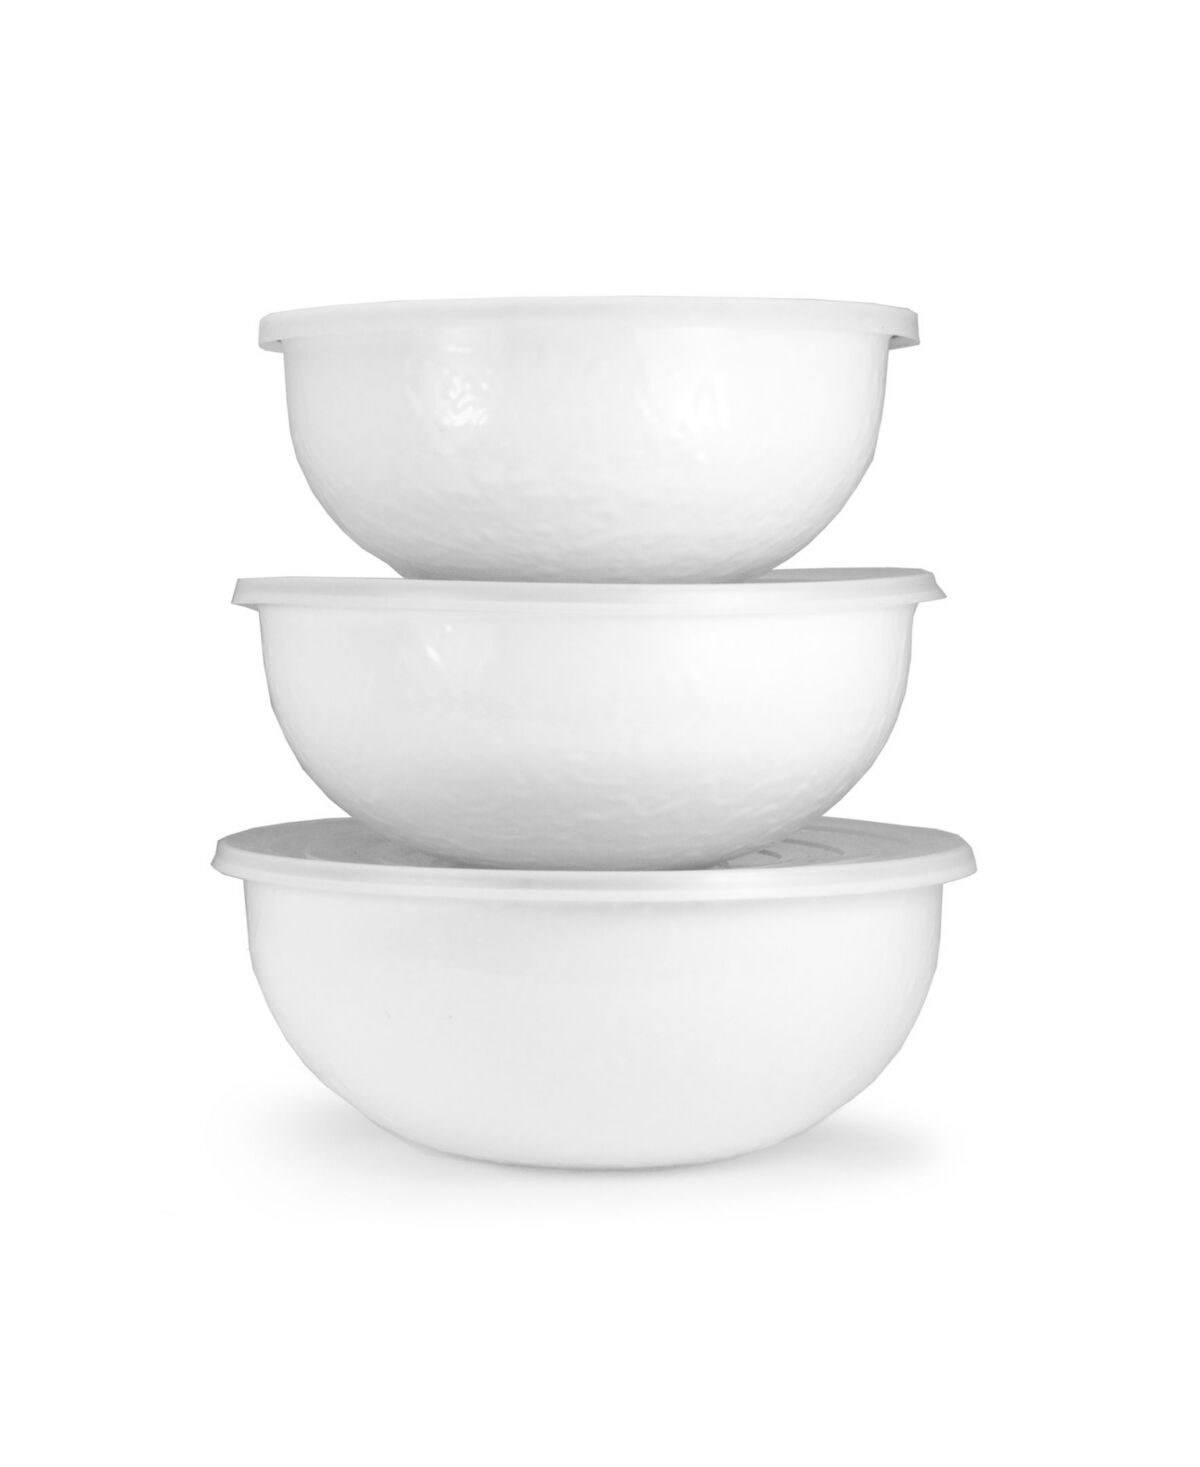 Golden Rabbit Solid White Enamelware Collection Mixing Bowls, Set of 3 - White